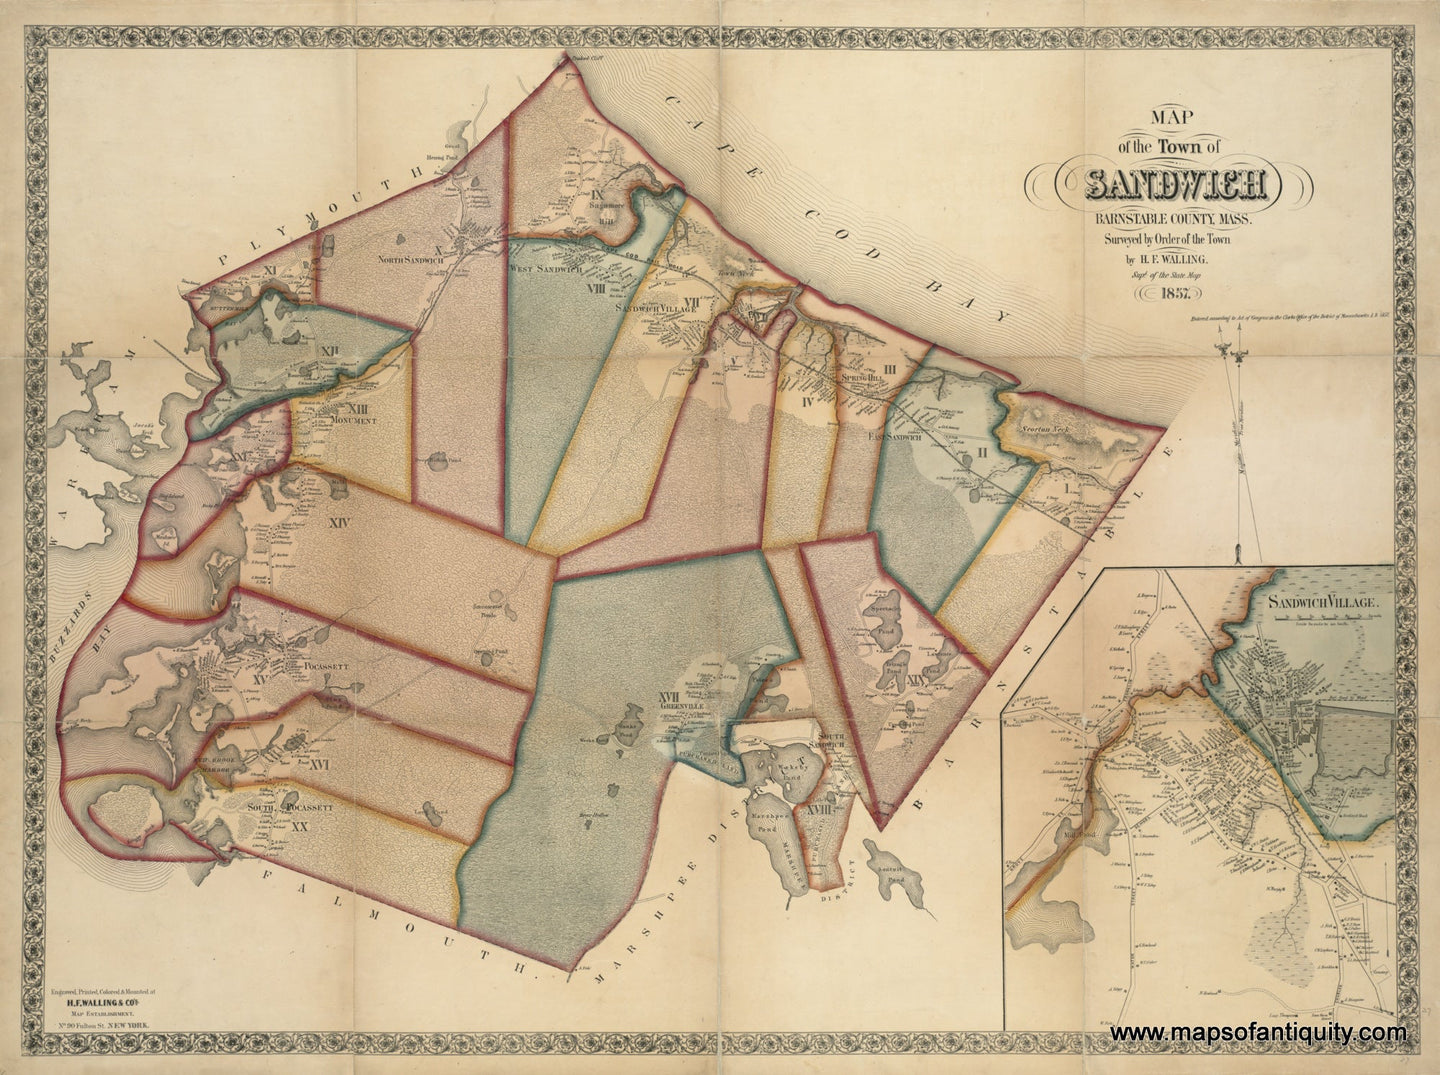 High-Quality-Giclee-Reproduction-Map-of-the-Town-of-Sandwich-Barnstable-County-Mass-1857---Maps-Of-Antiquity